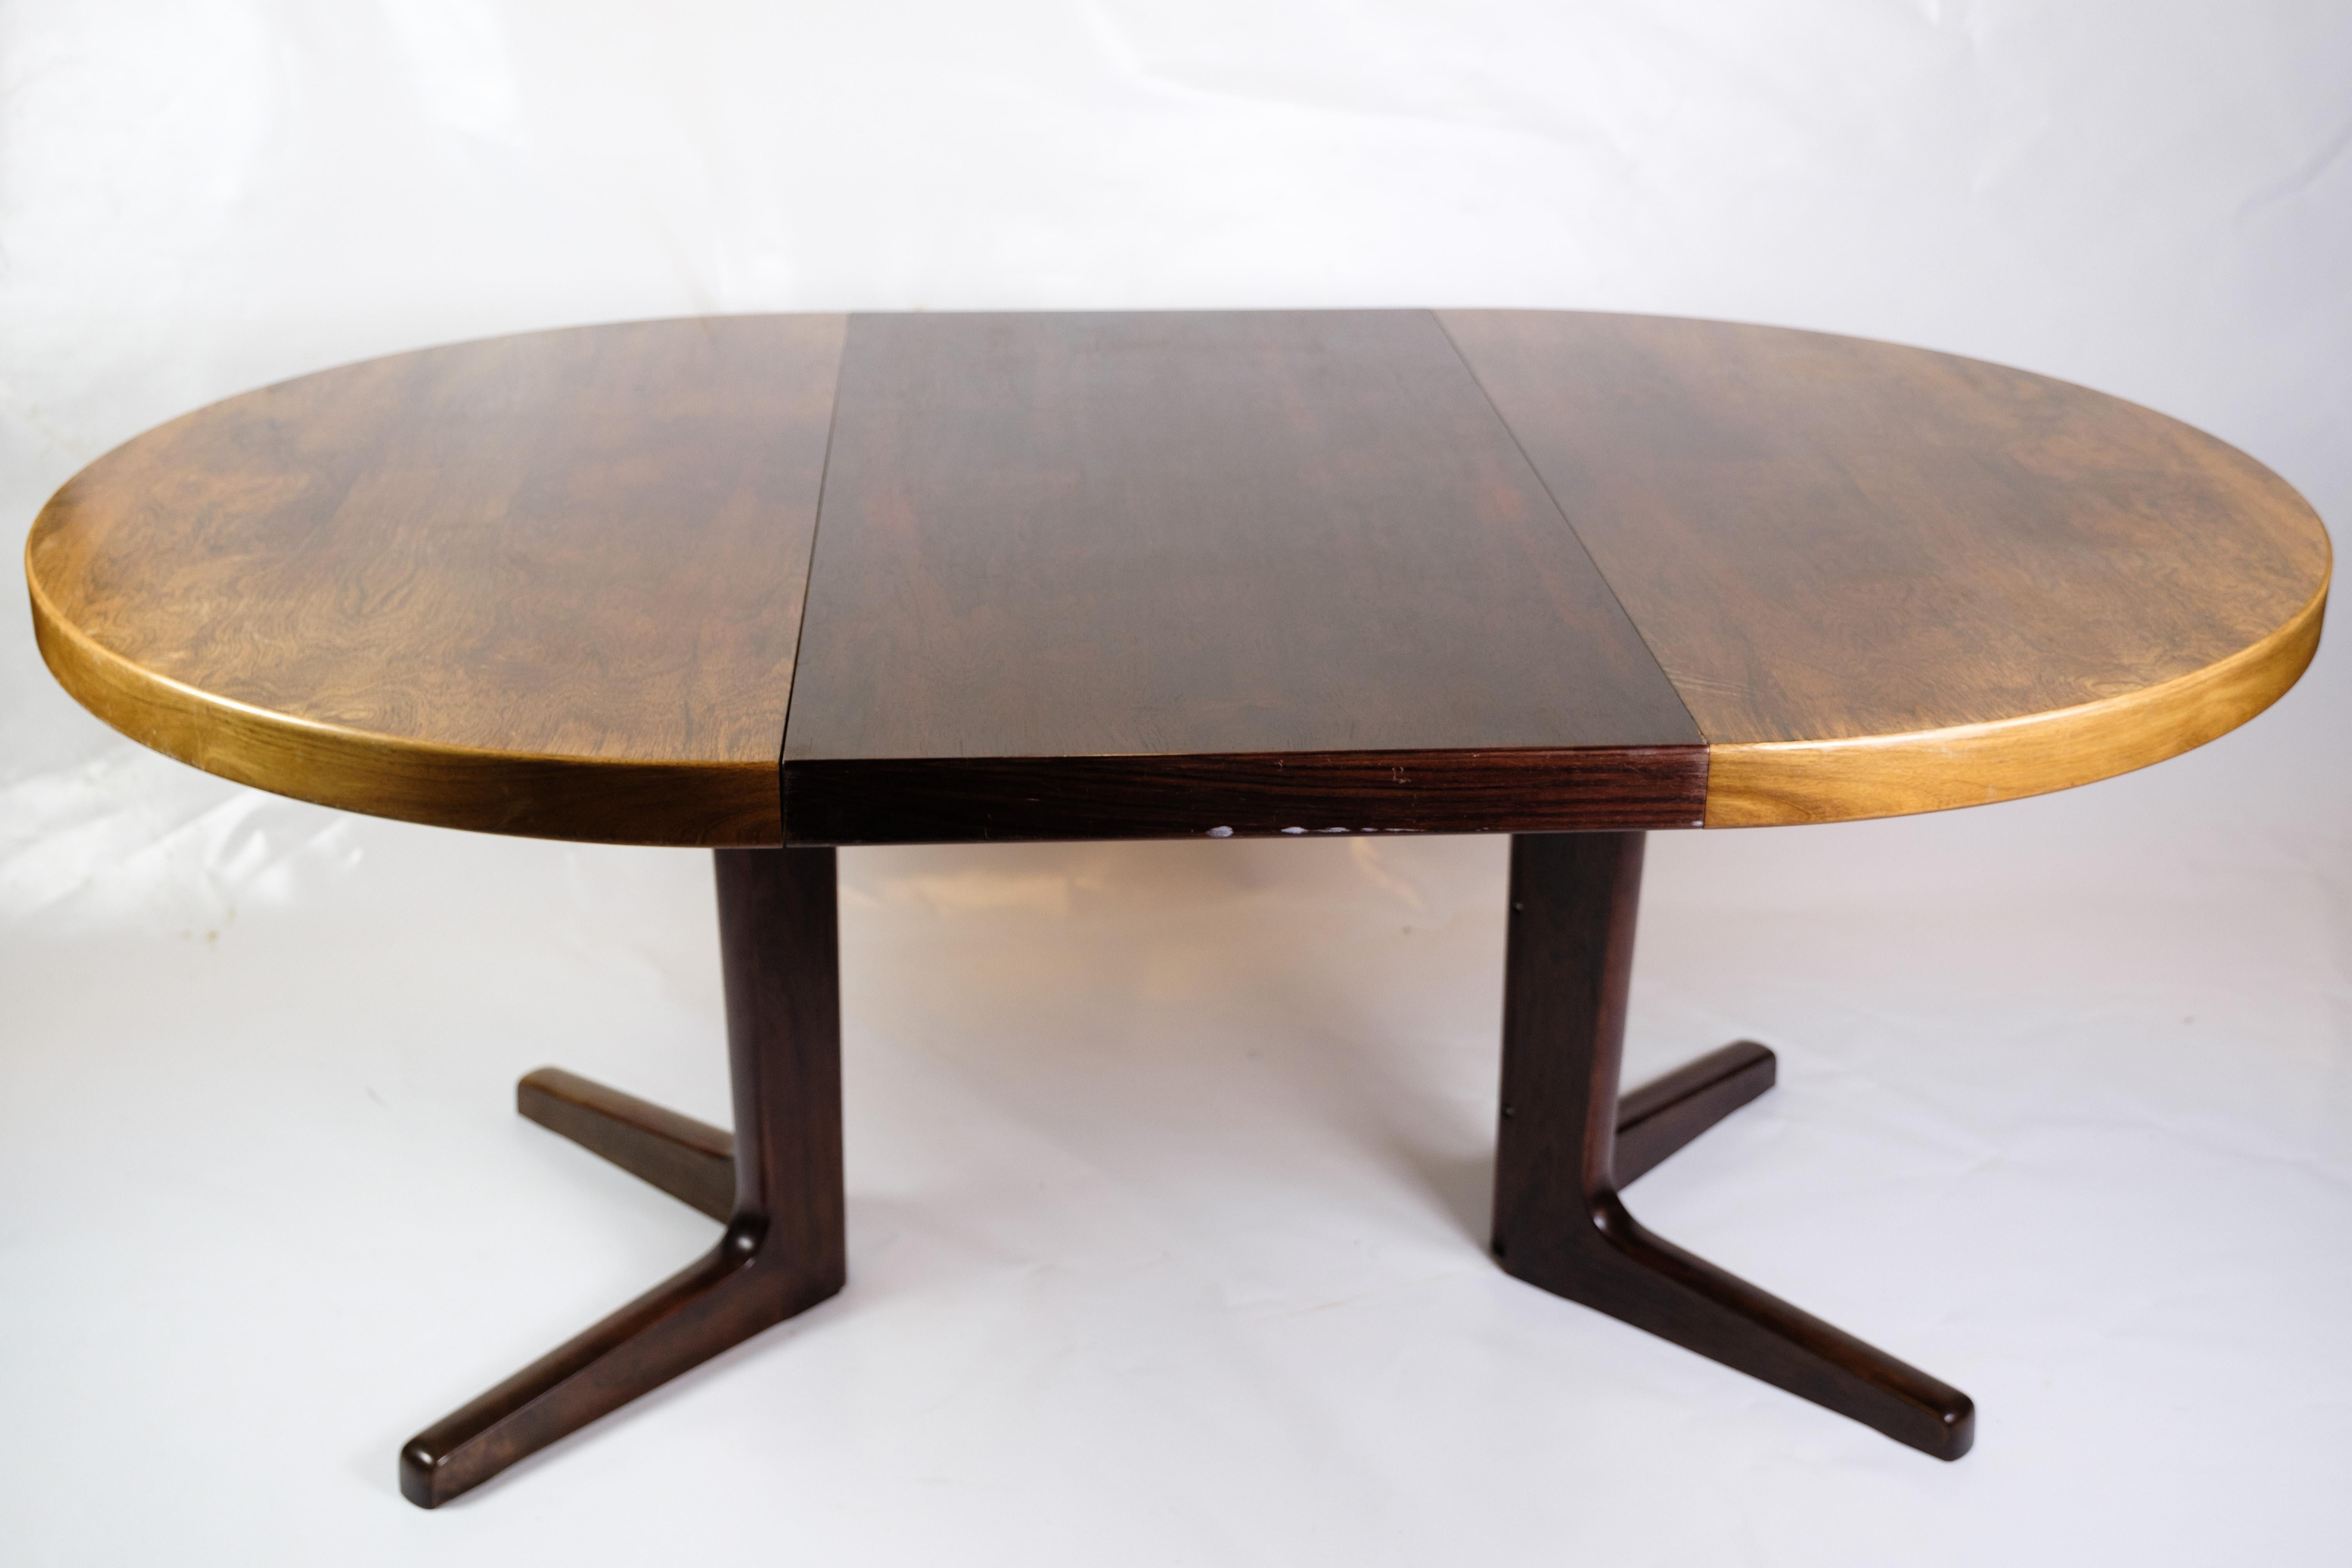 Round Dining Room Table Made In Rosewood By Skovby Møbelfabrik From 1960s In Good Condition For Sale In Lejre, DK